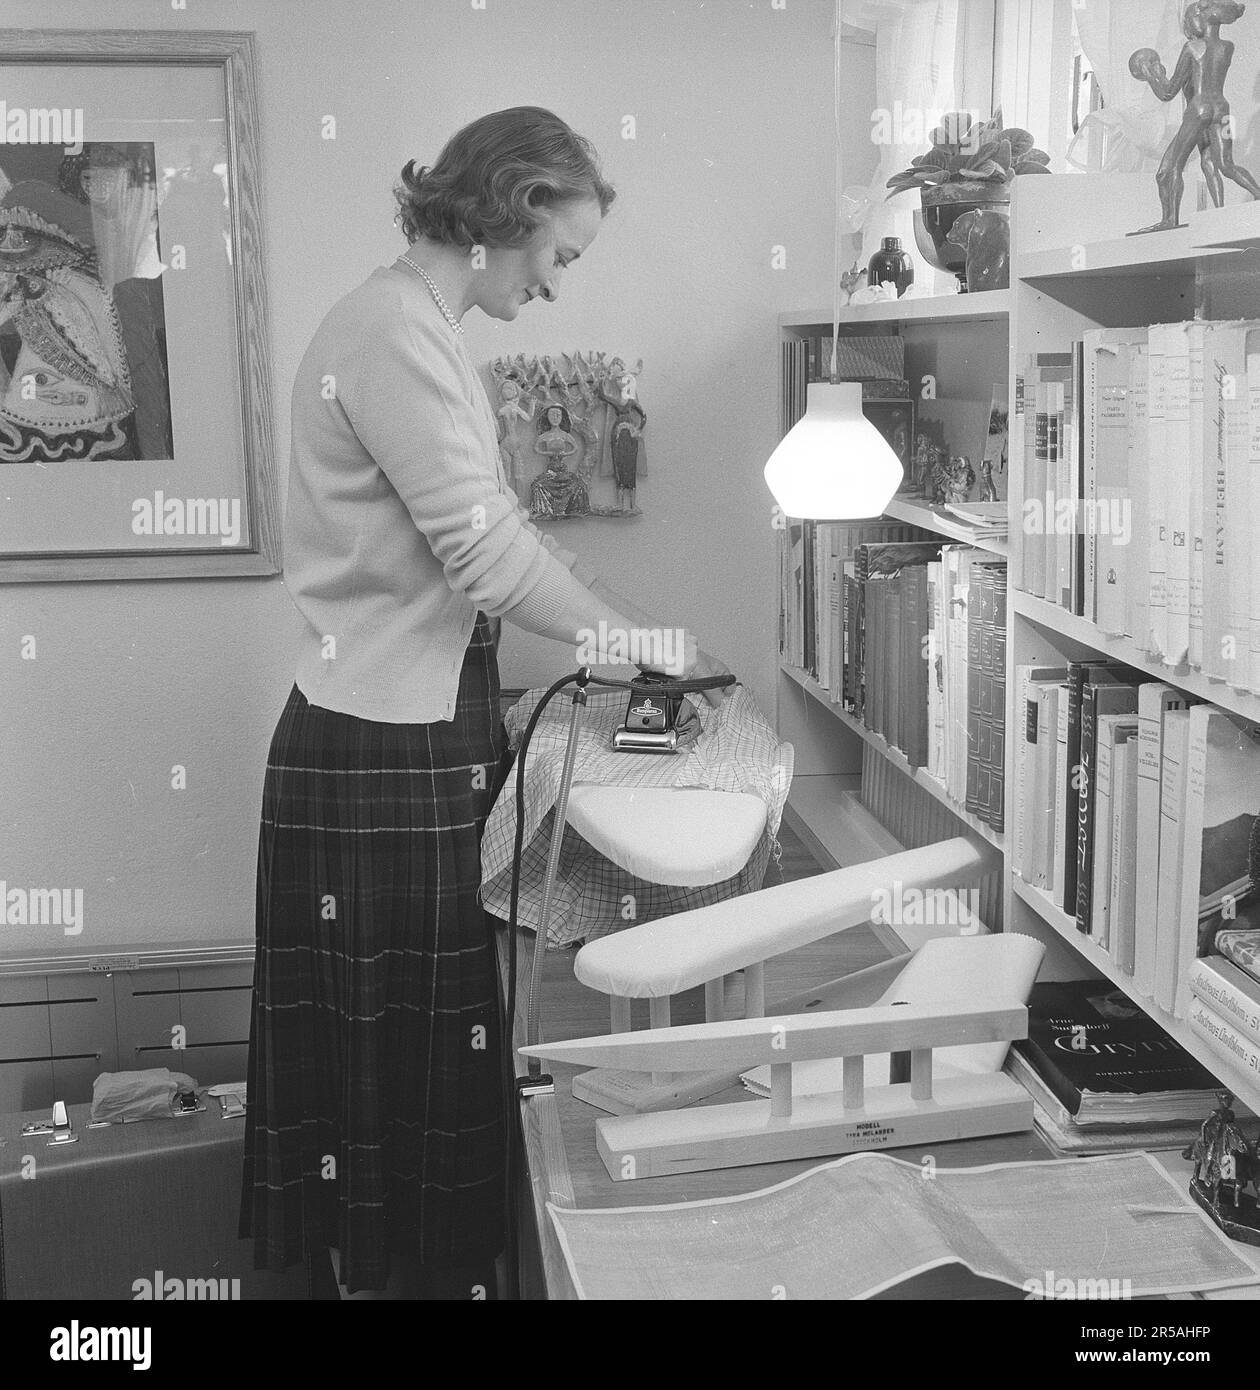 Ironing in the 1950s. A woman seen ironing her clothes at home. Perhaps prior a holdiay trip as her suitcase is seen standing on the floor beside her. She is Mrs. Blomberg living in Lidingö Stockholm.  Sweden march 1956 Stock Photo